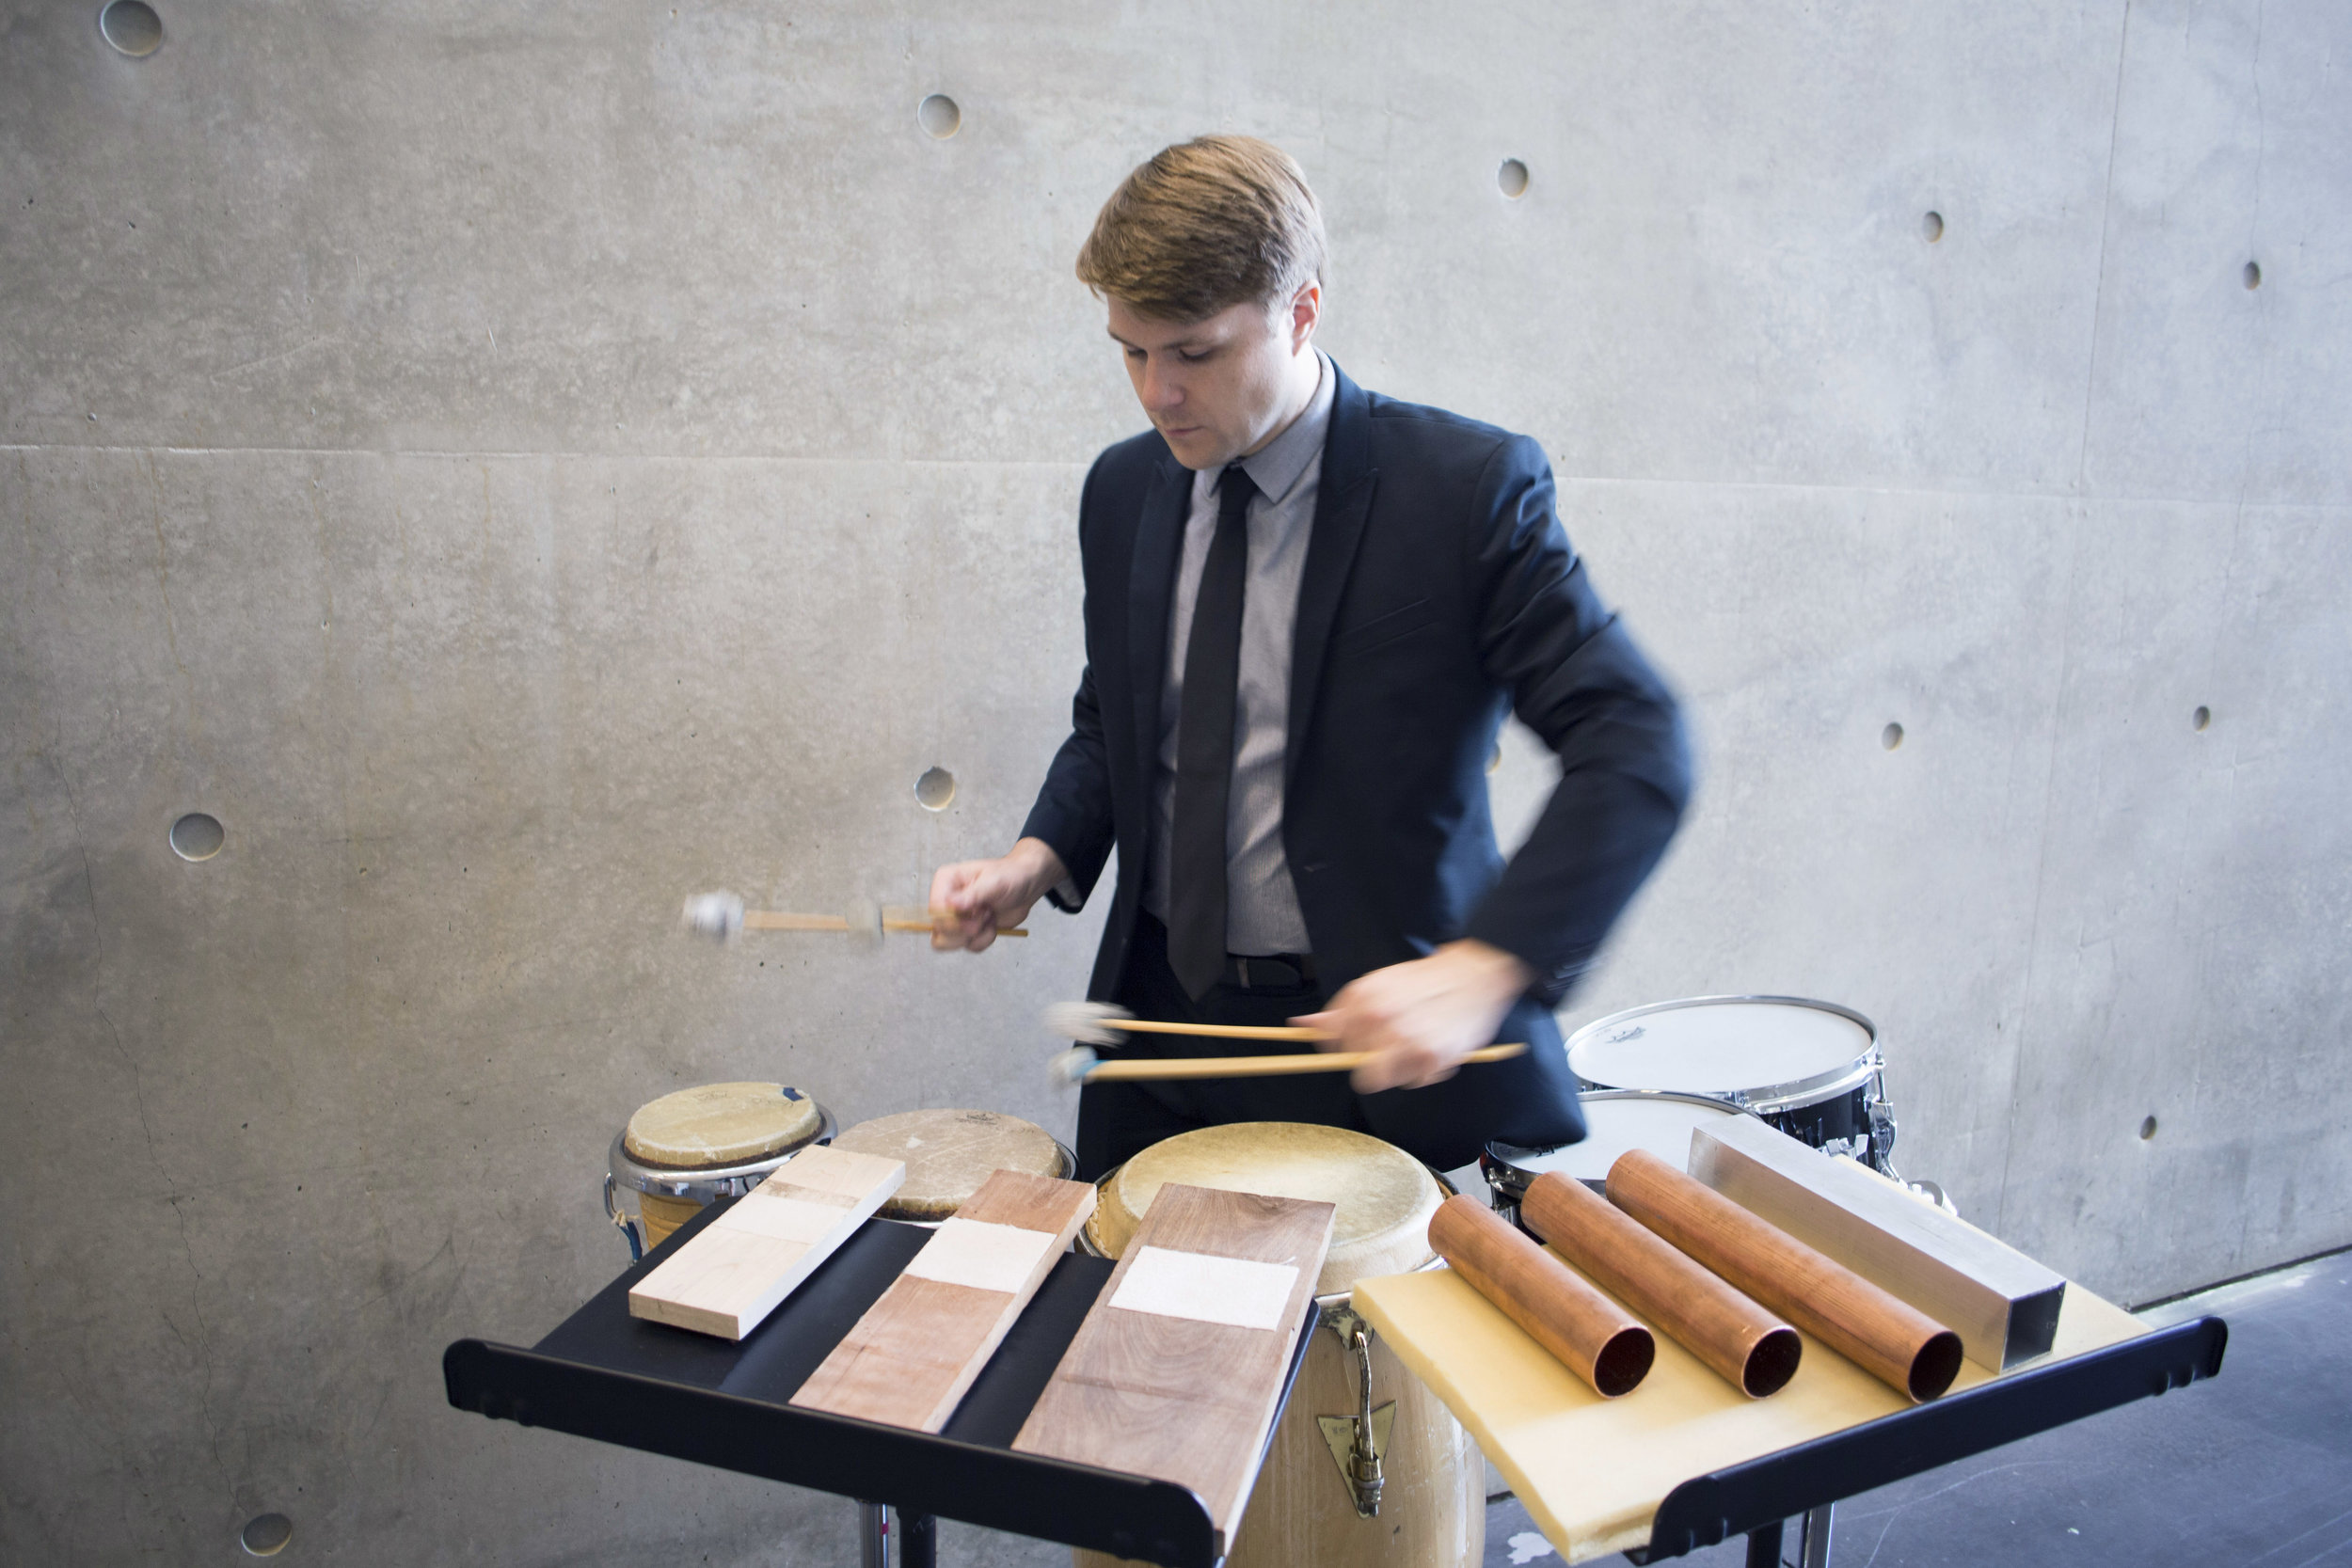 A percussionist in a dark blue suit performs on some instruments